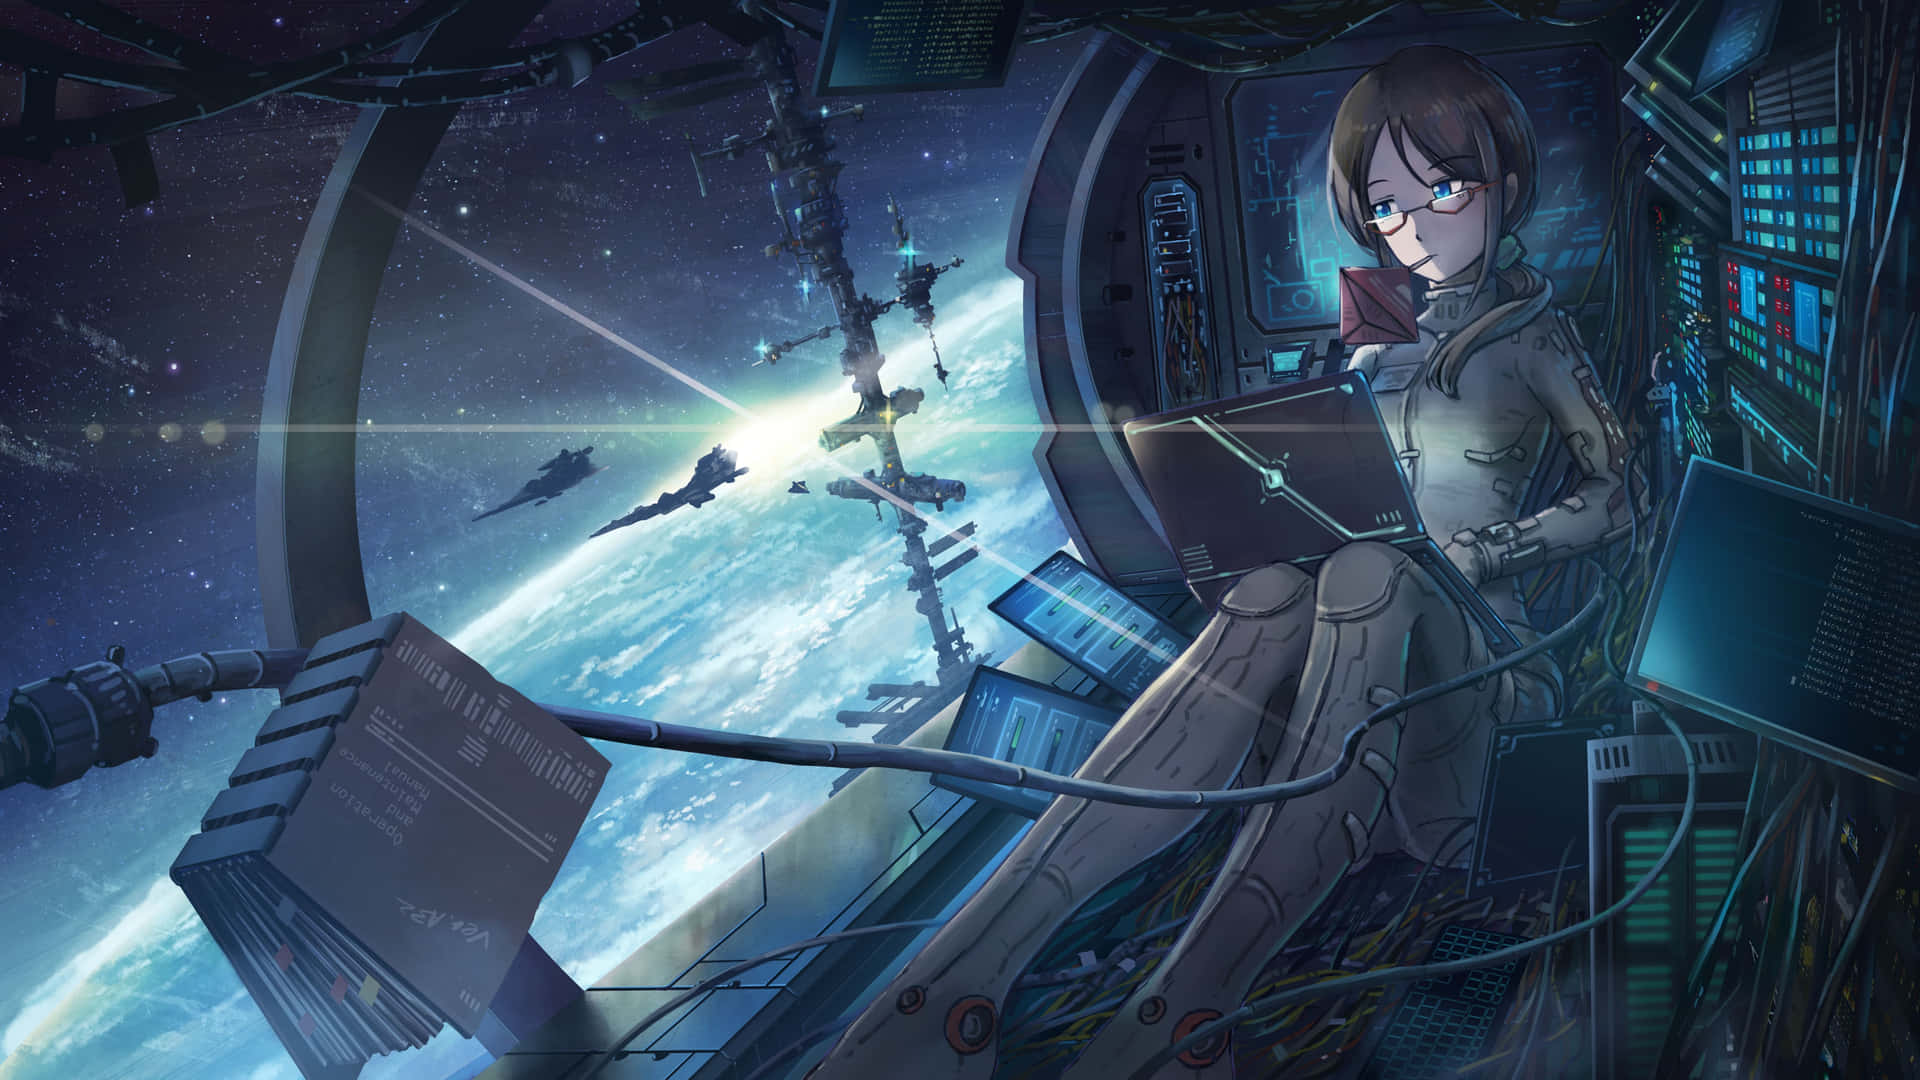 Fly Through The Depths of Space With This Stunning 4K Anime Wallpaper Wallpaper